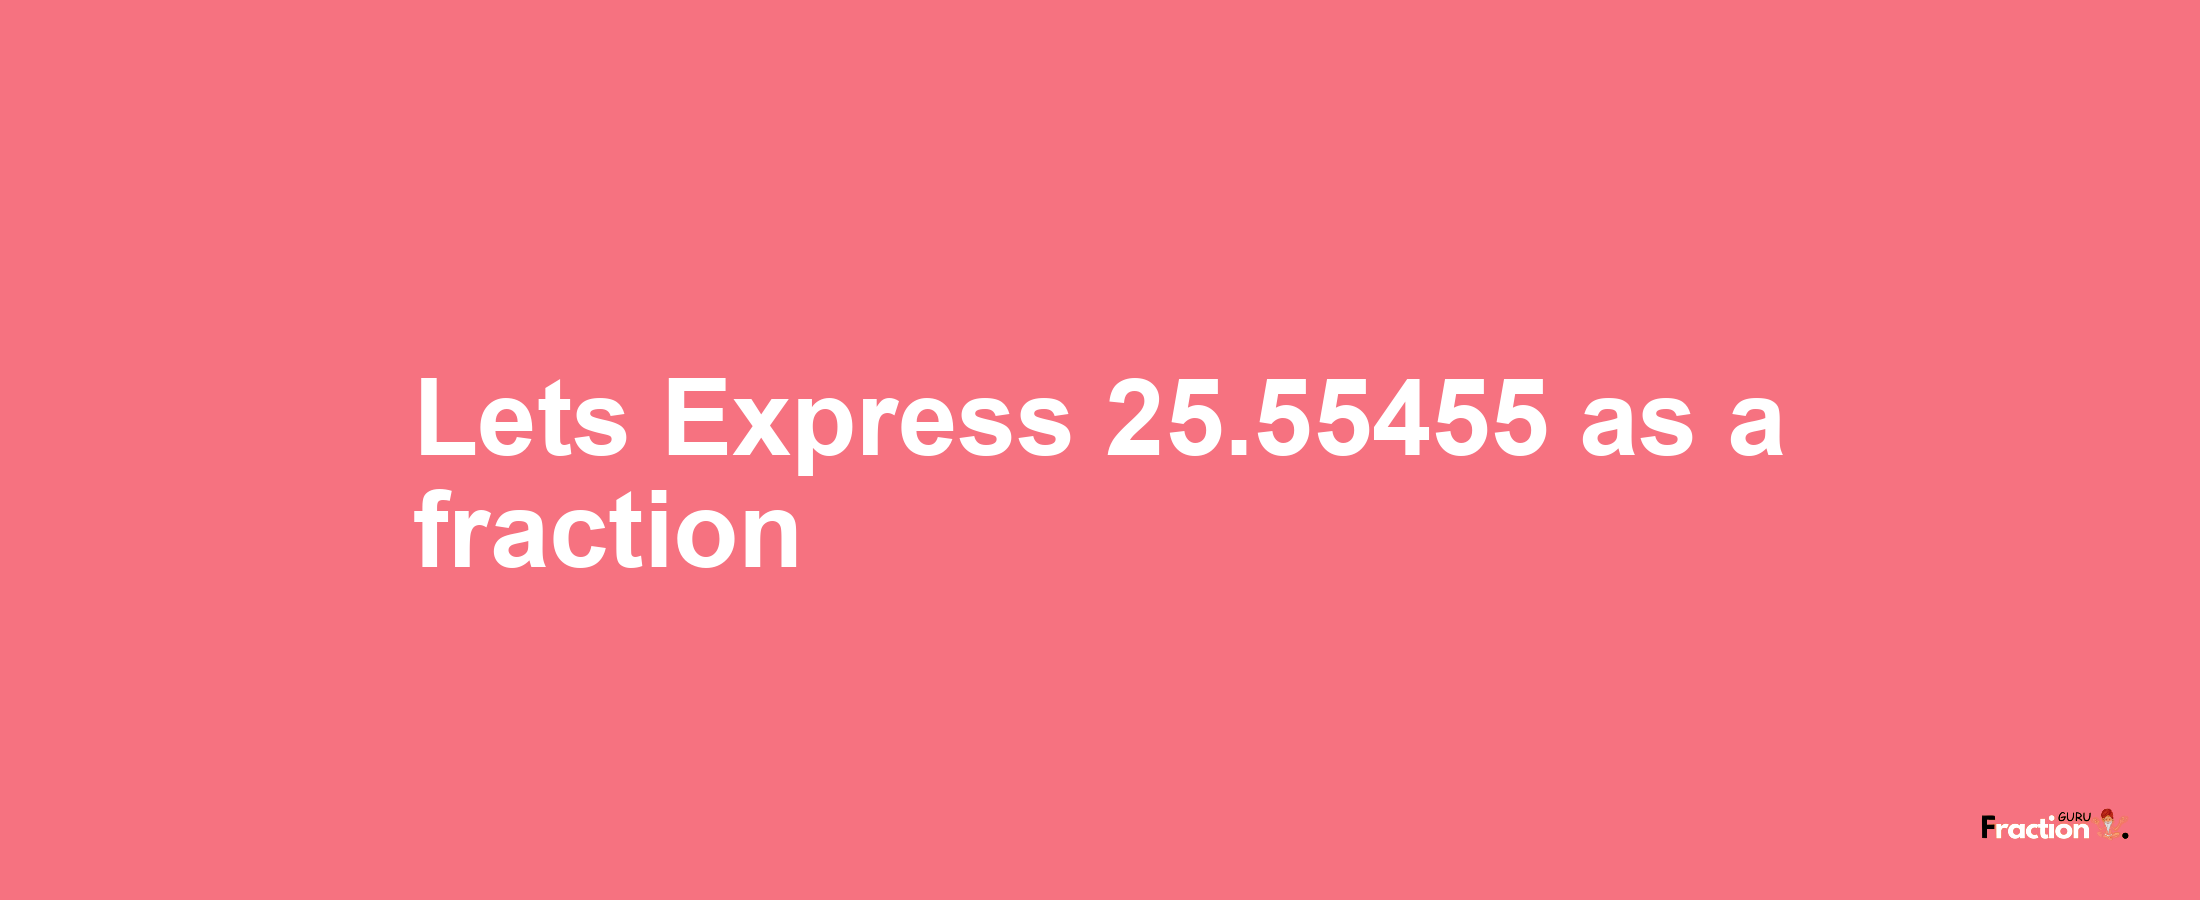 Lets Express 25.55455 as afraction